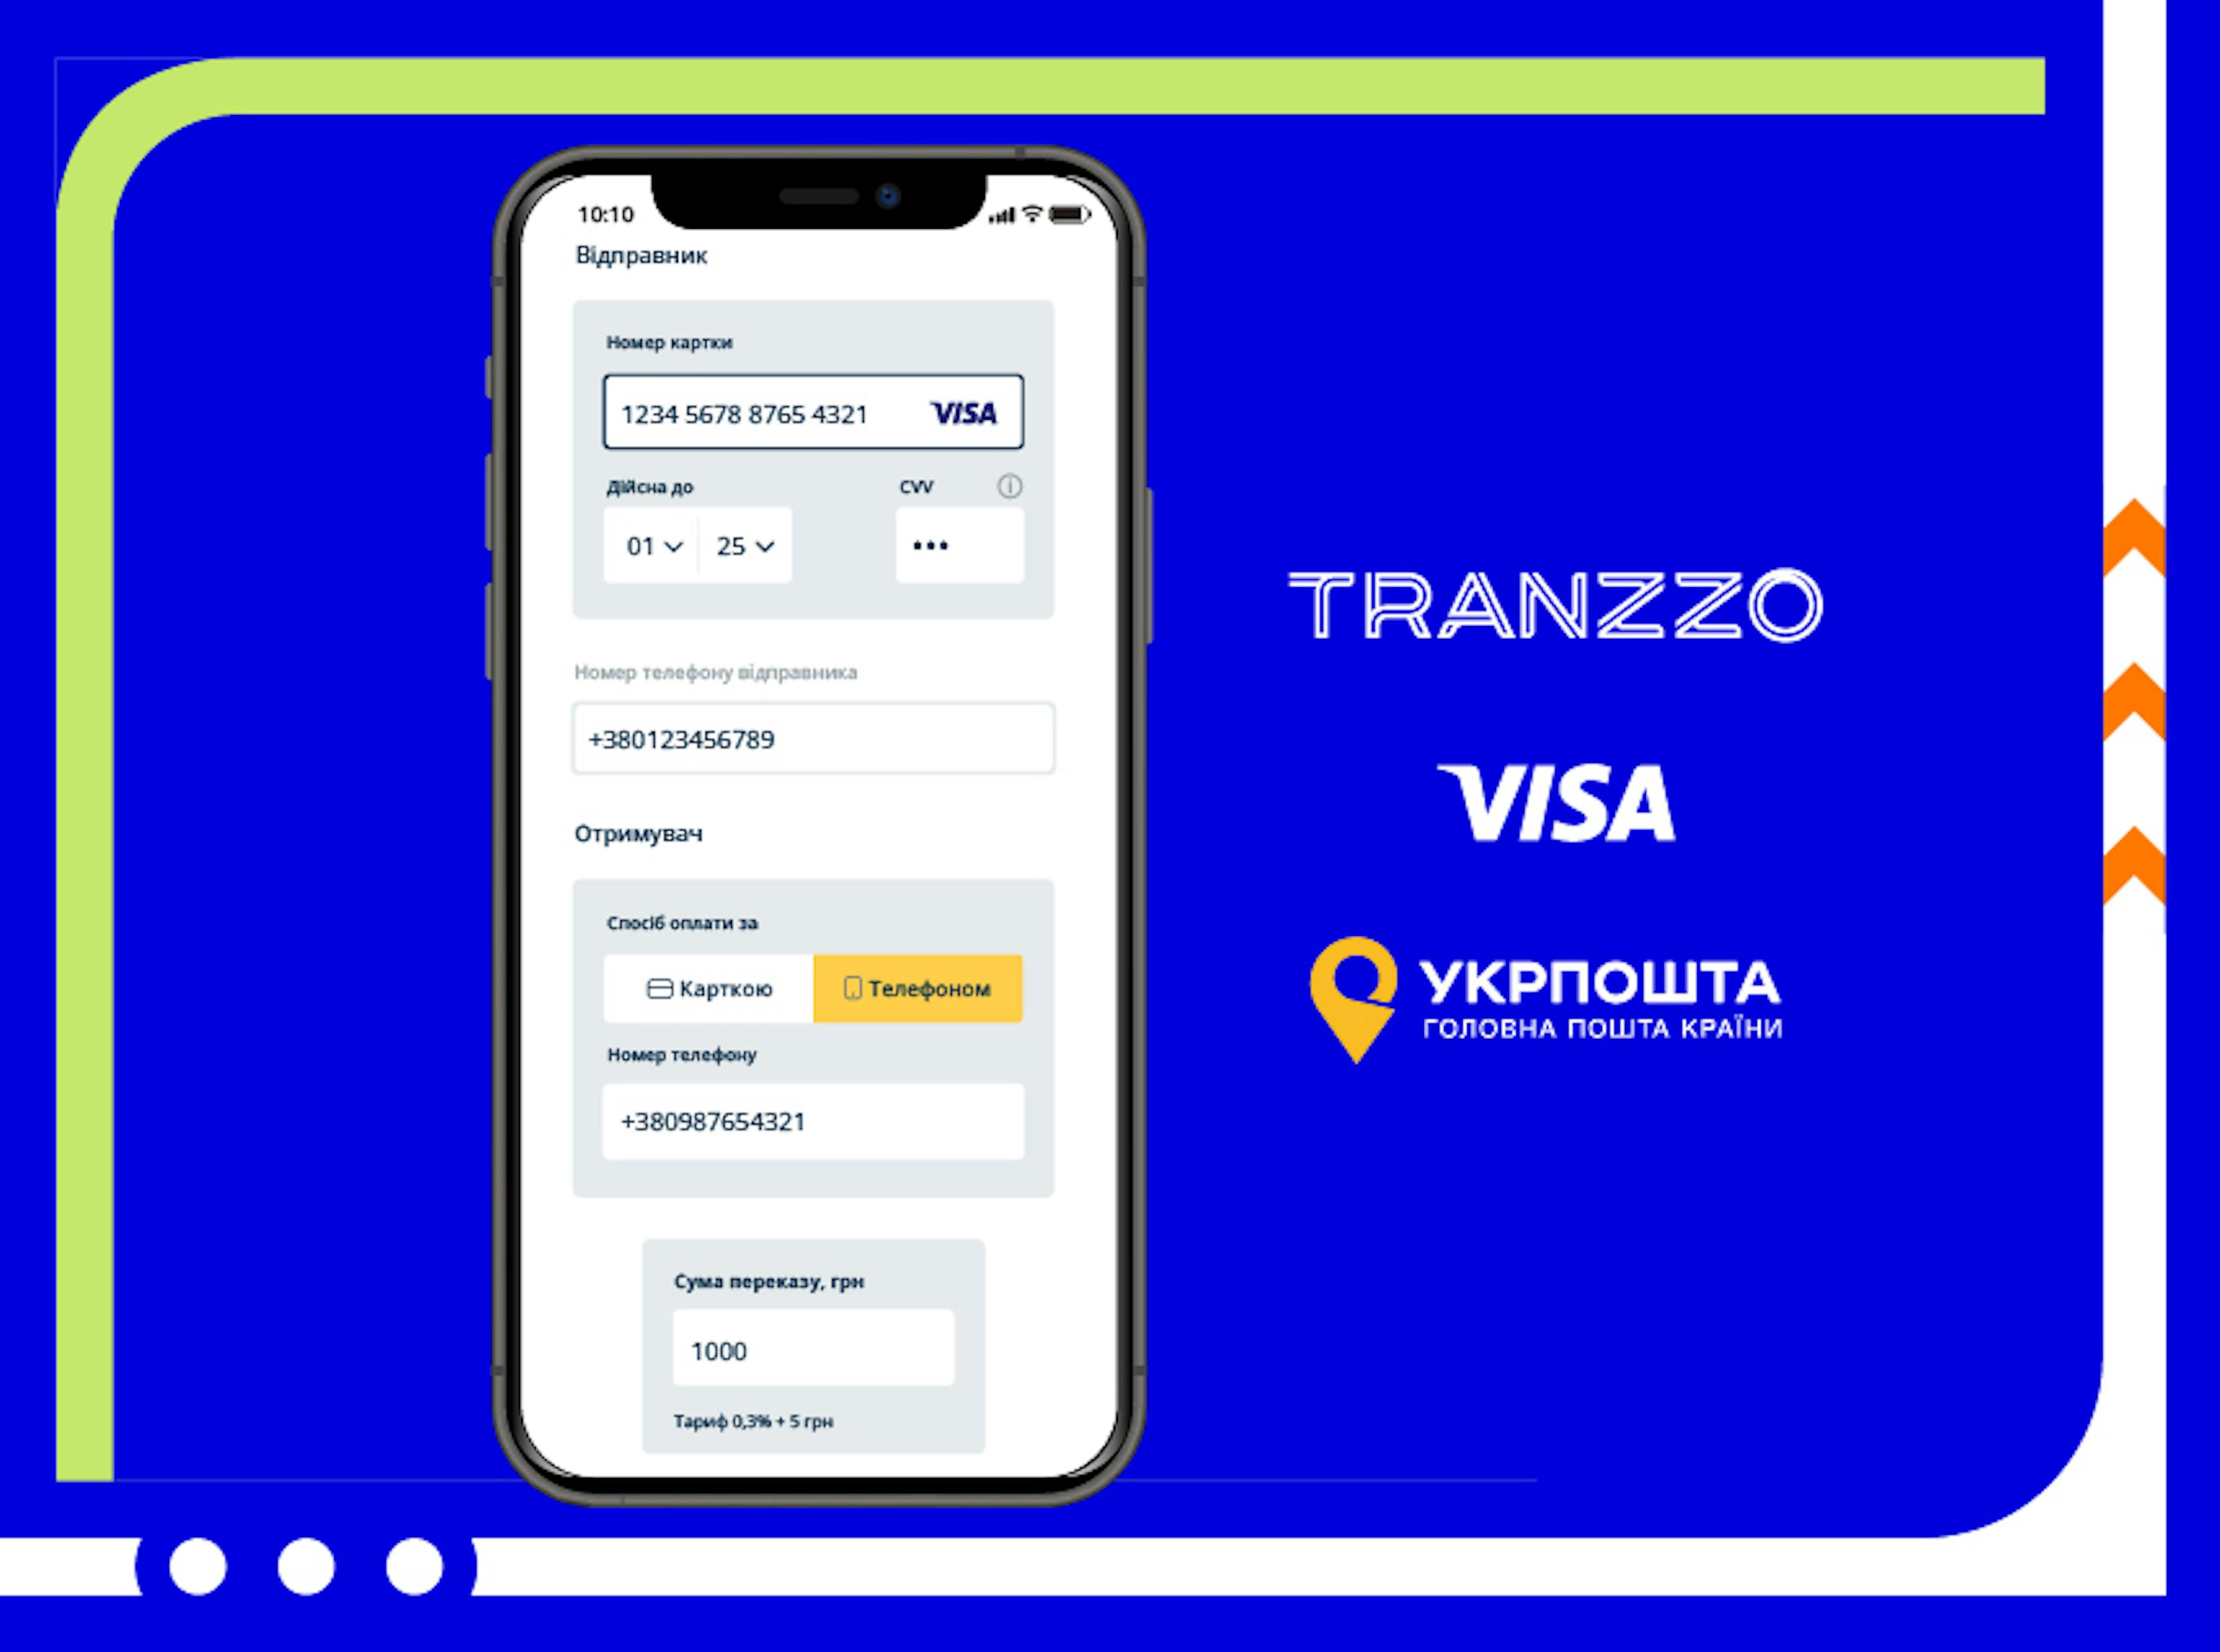 Tranzzo launches a new payment service for Ukrposhta using a service from Visa